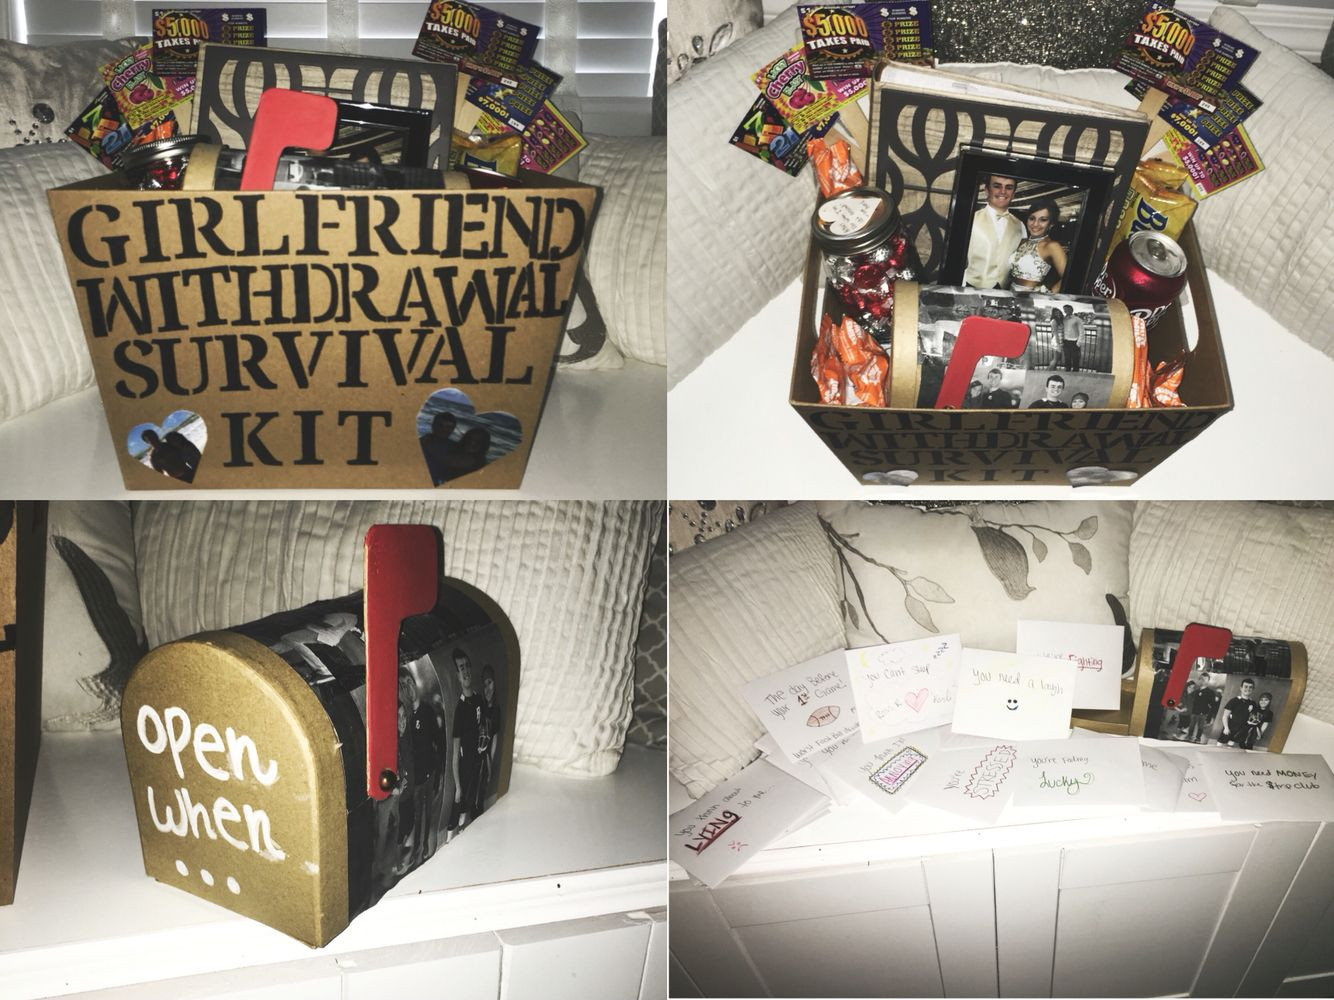 College Girlfriend Gift Ideas
 Girlfriend withdrawal survival kit and open when letters